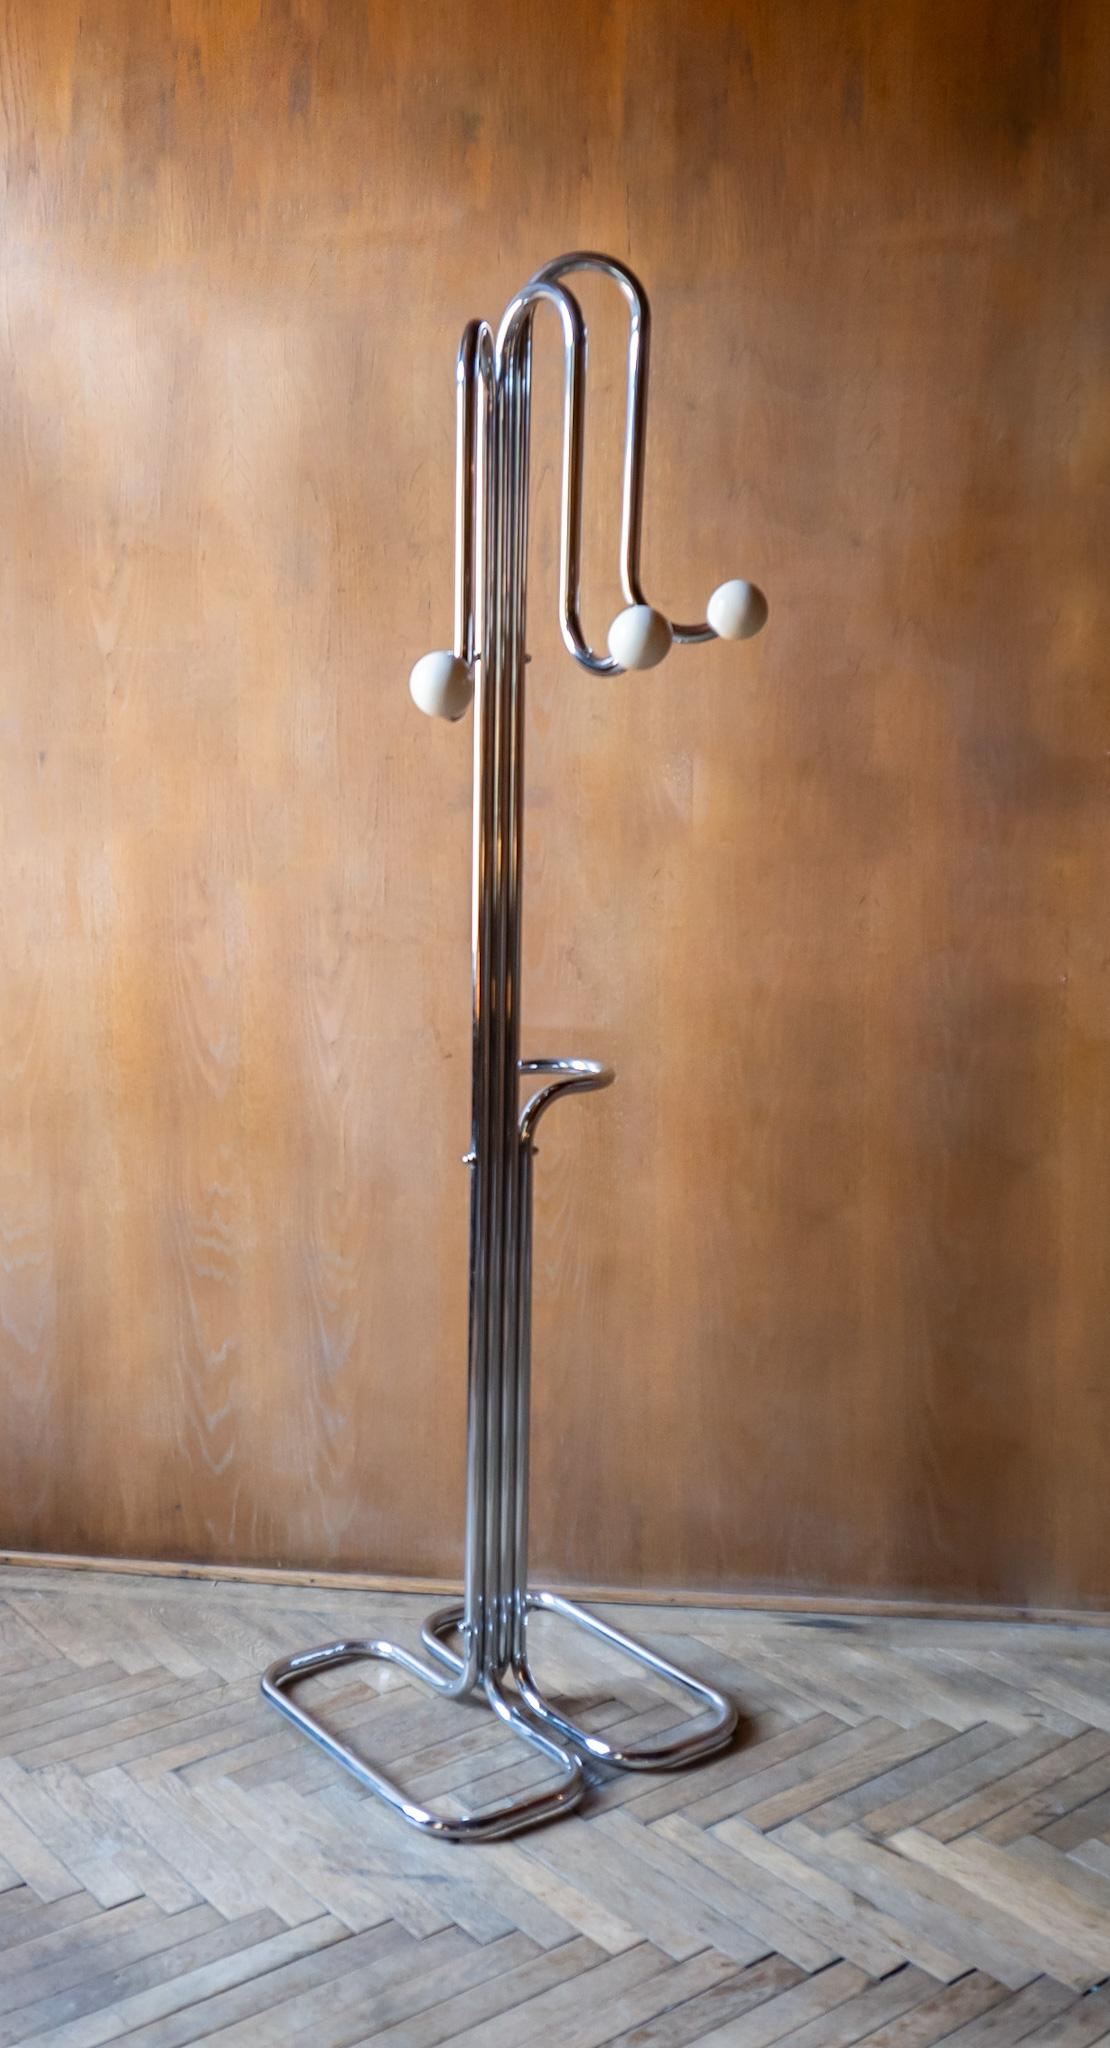 Space Age XL Coat Rack, Chrome Plated, Wooden Spheres, Italy, 1970s.

This fantastic coat rack is made of chrome-plated aluminium.The lively and interesting tubes run from the base of the coat rack to the top of it, where they finish with XL wooden